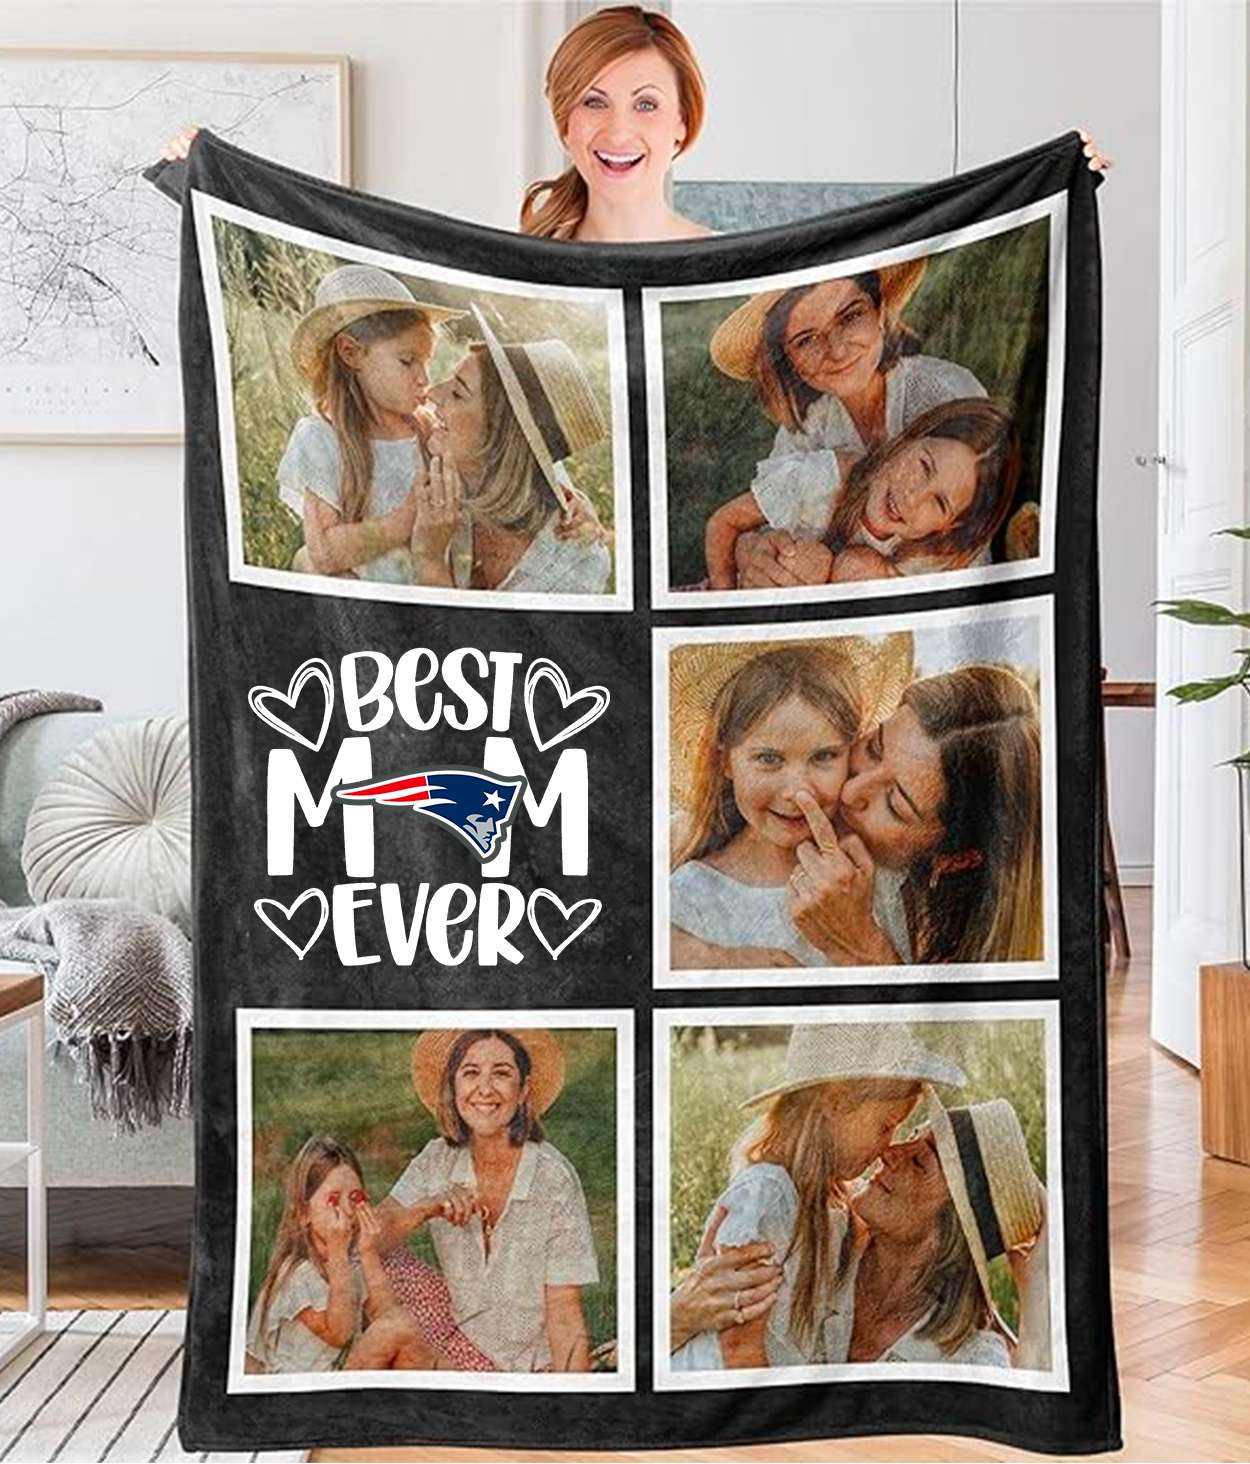 Best Mom Ever - Custom NFL New England Patriots Blankets with Pictures for Mother's Day Gift